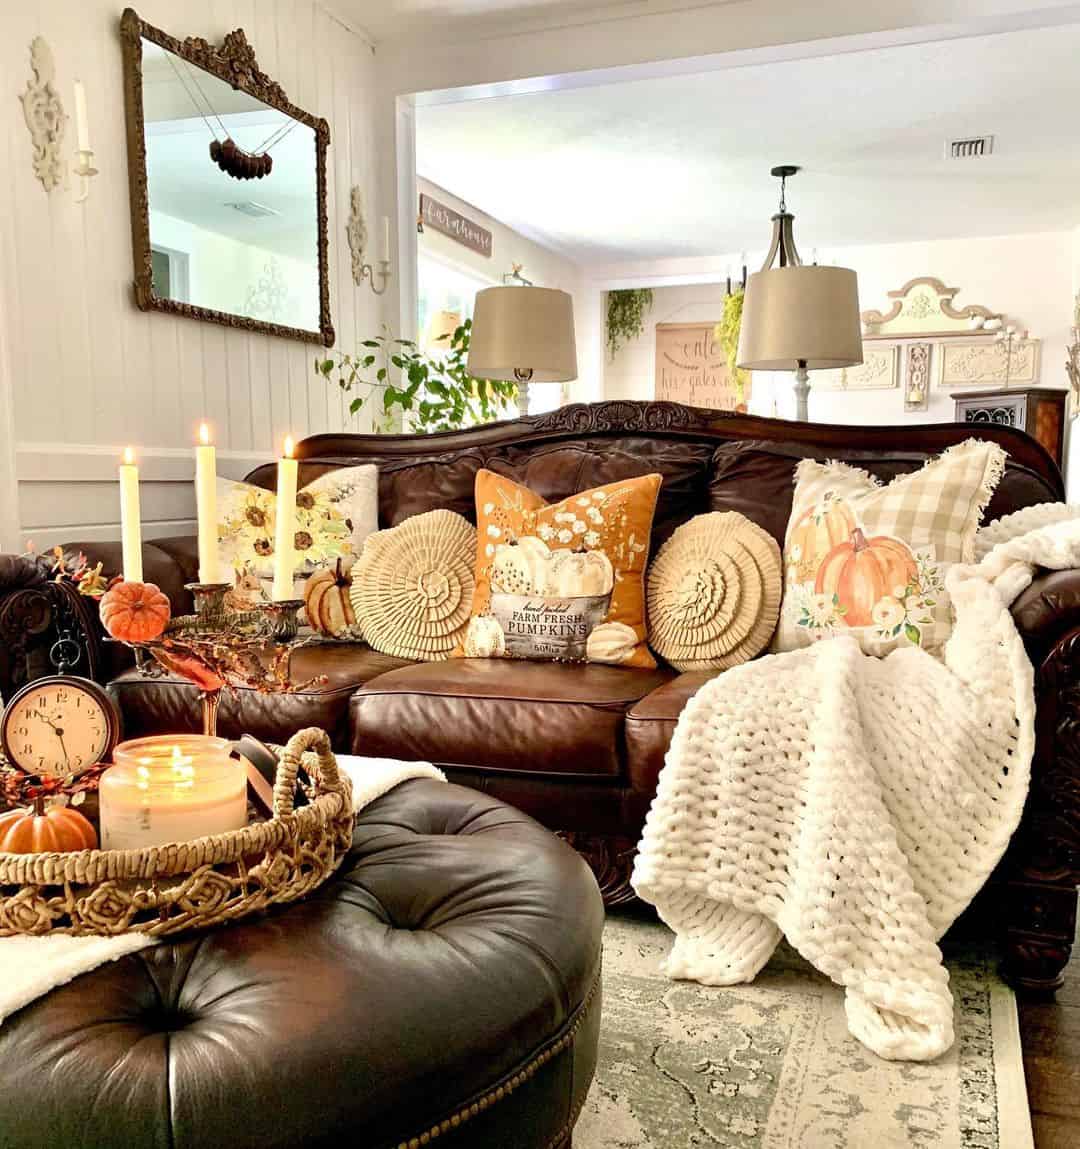 20 Stylish Throw Pillow Ideas for Brown Couches